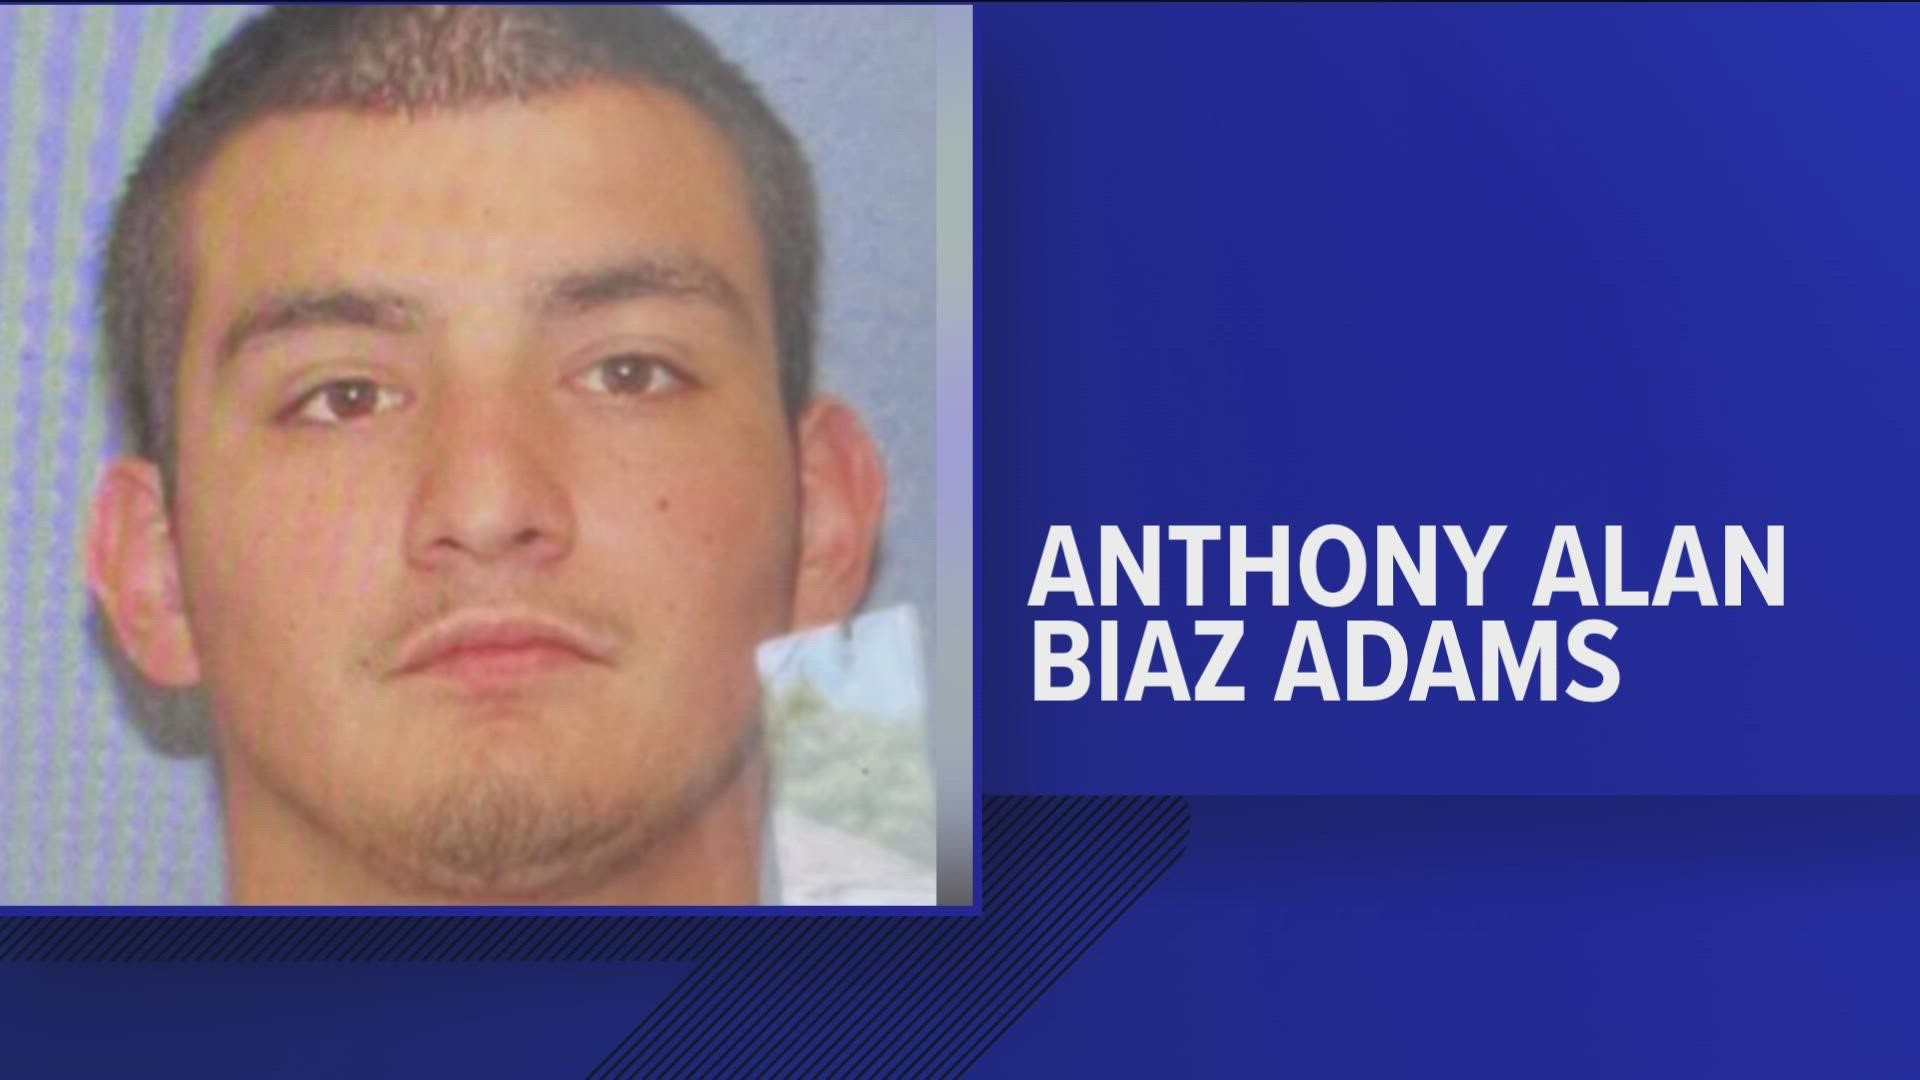 Police say Anthony Alan Biaz Adams is a registered sex offender and may be in the area of Garden, Crissey, Airport, and Albon Roads in Springfield Twp.